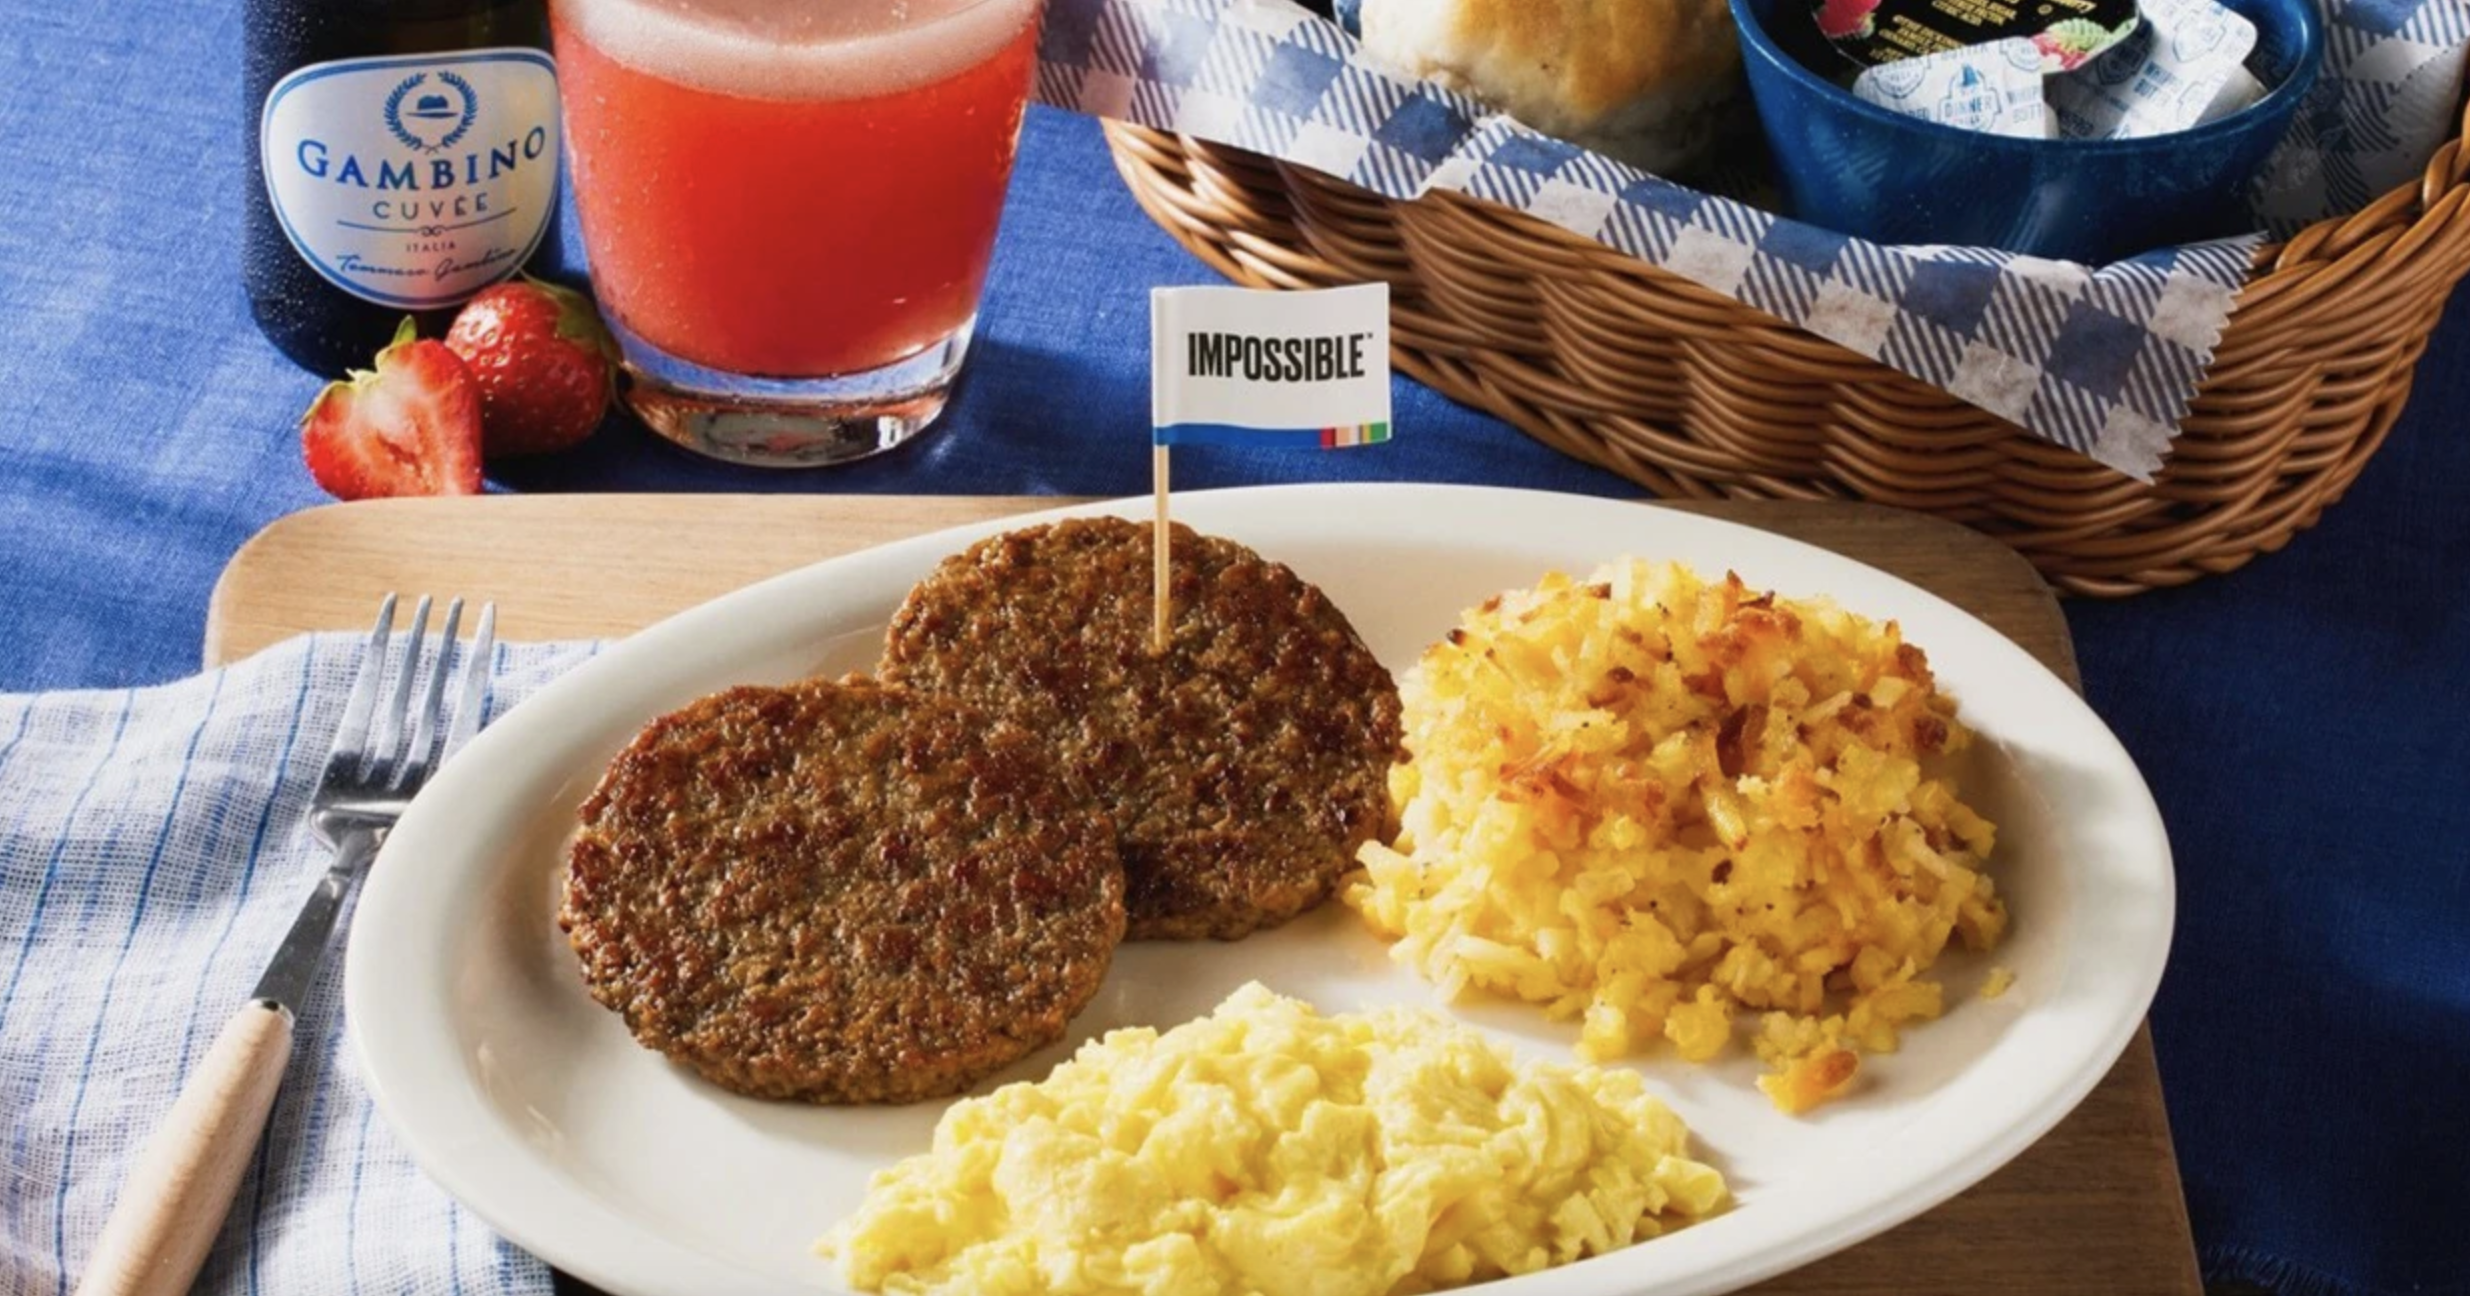 Cracker Barrel Posted About Its New Meatless Sausage, Causing Major Beef With Its ‘Customer Base’ – NBC 6 South Florida